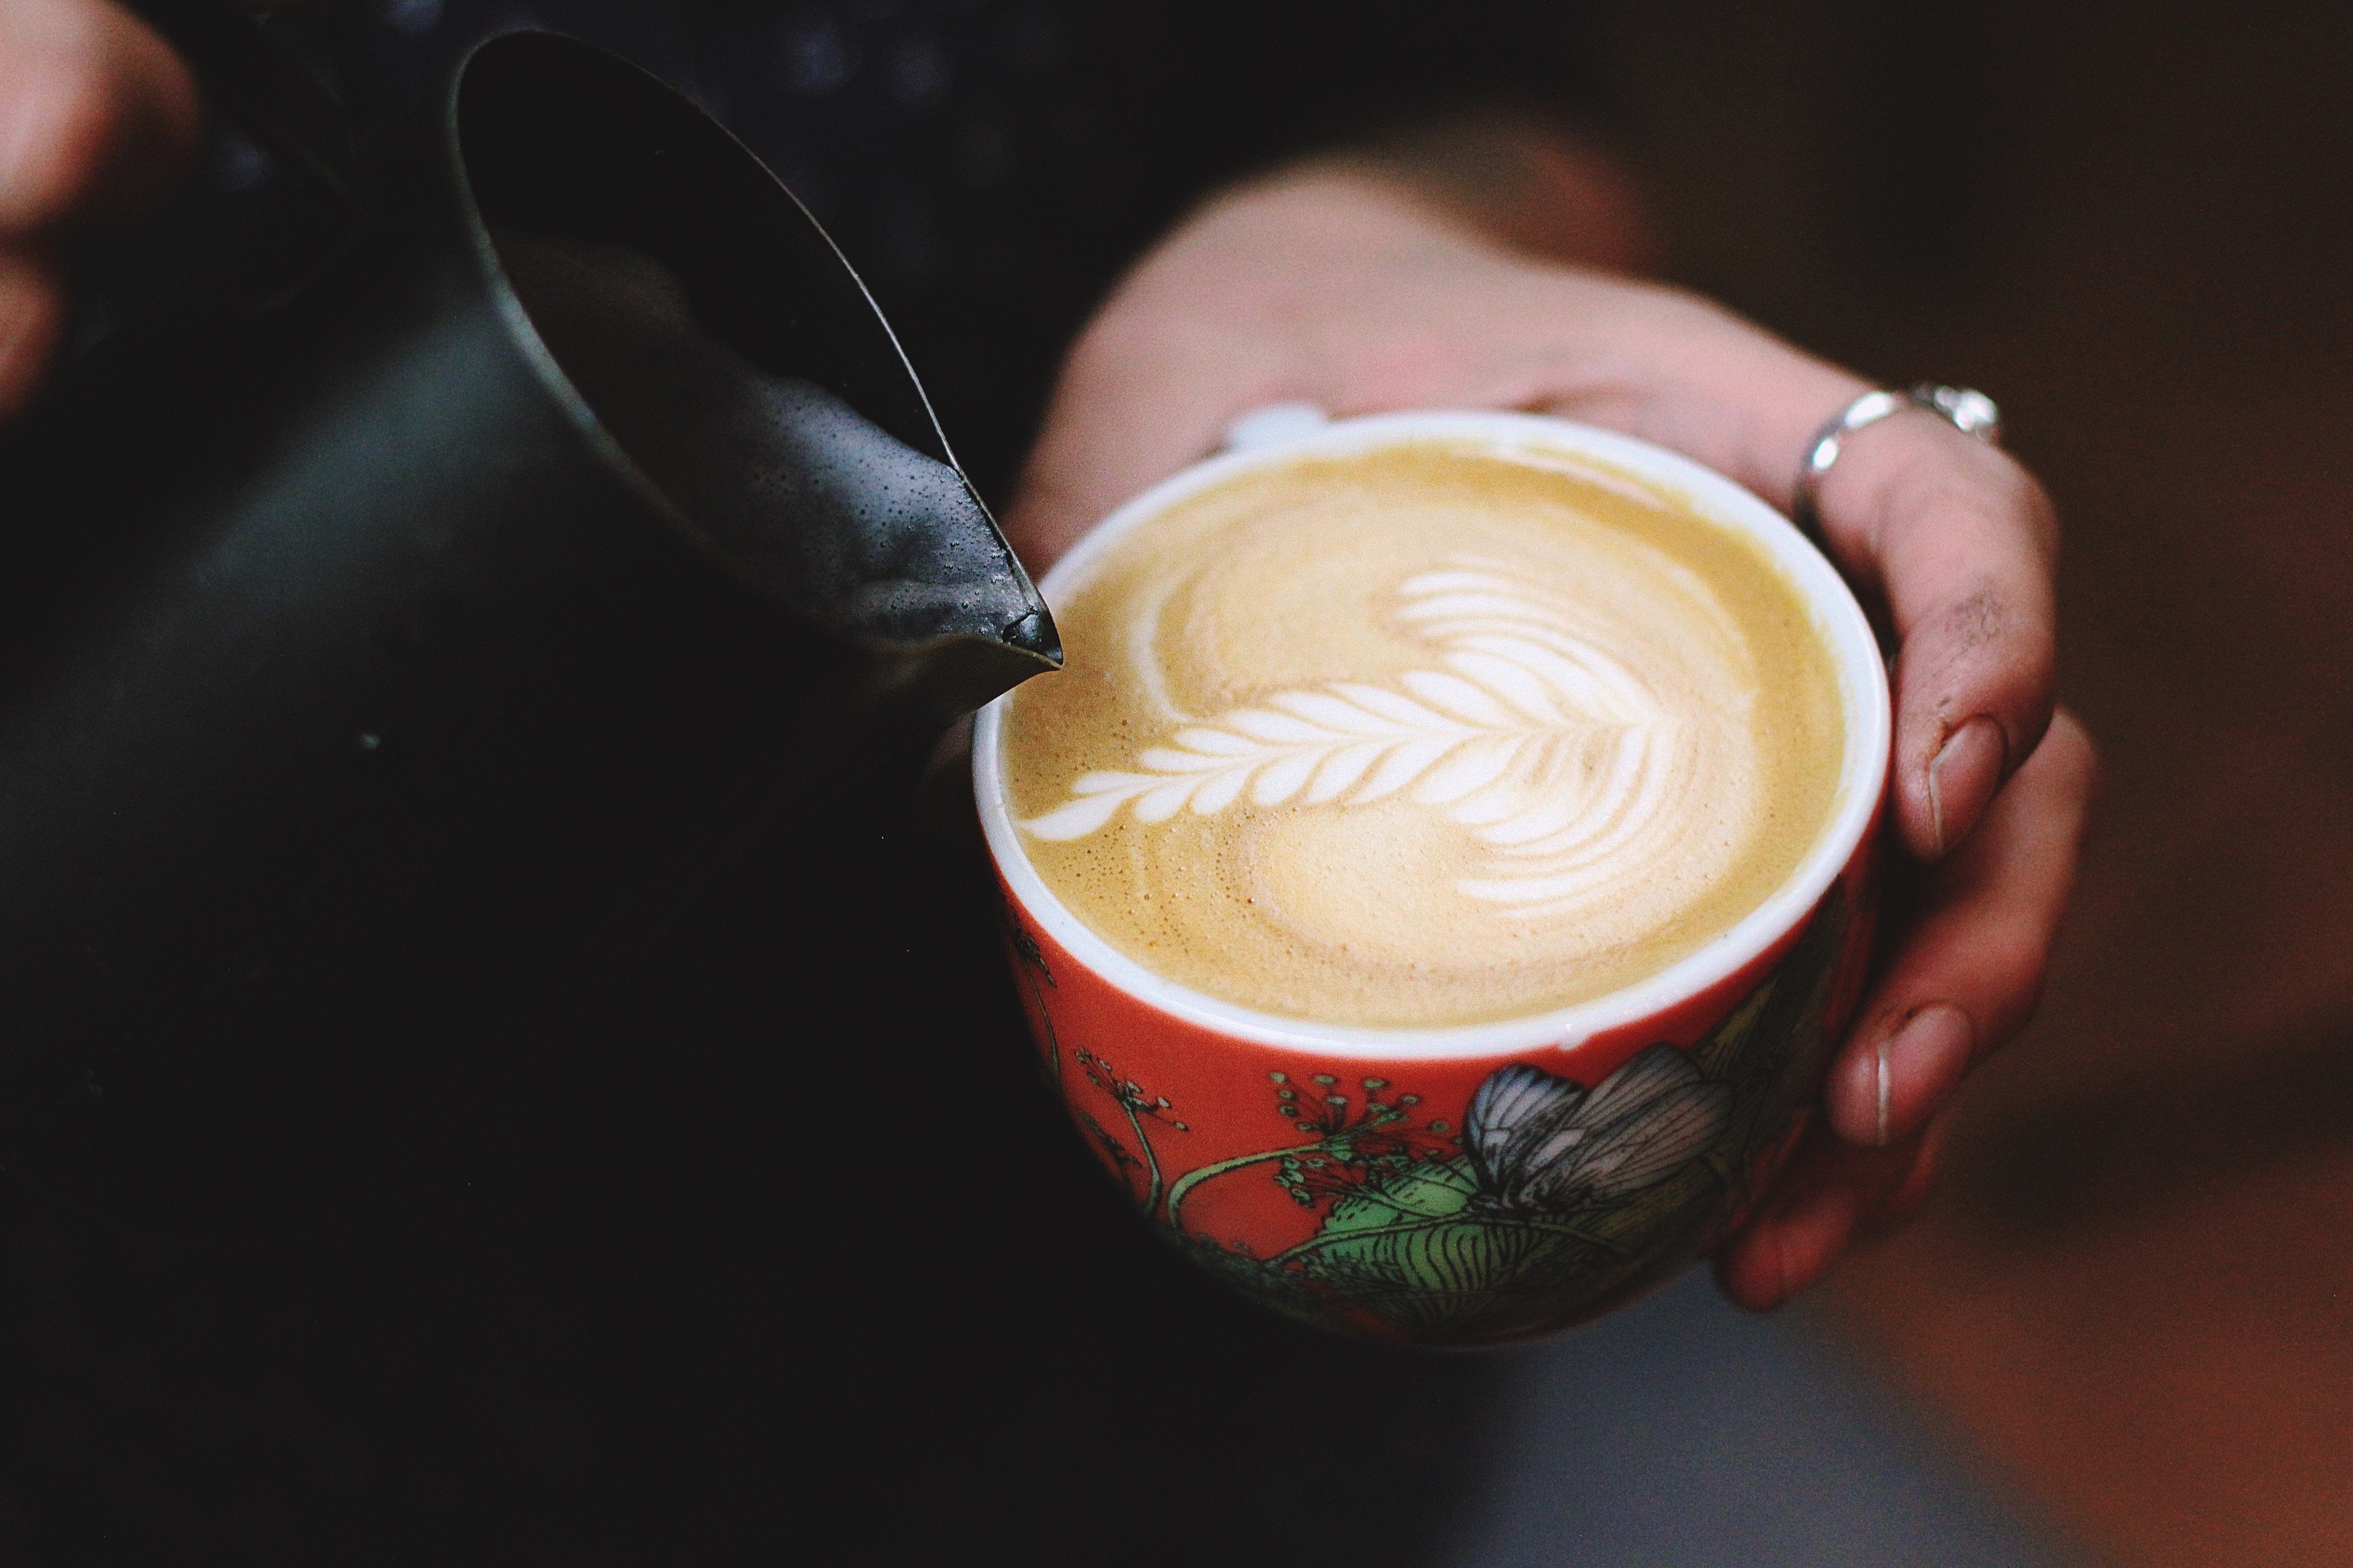 Pouring latte art on a flat white drink.